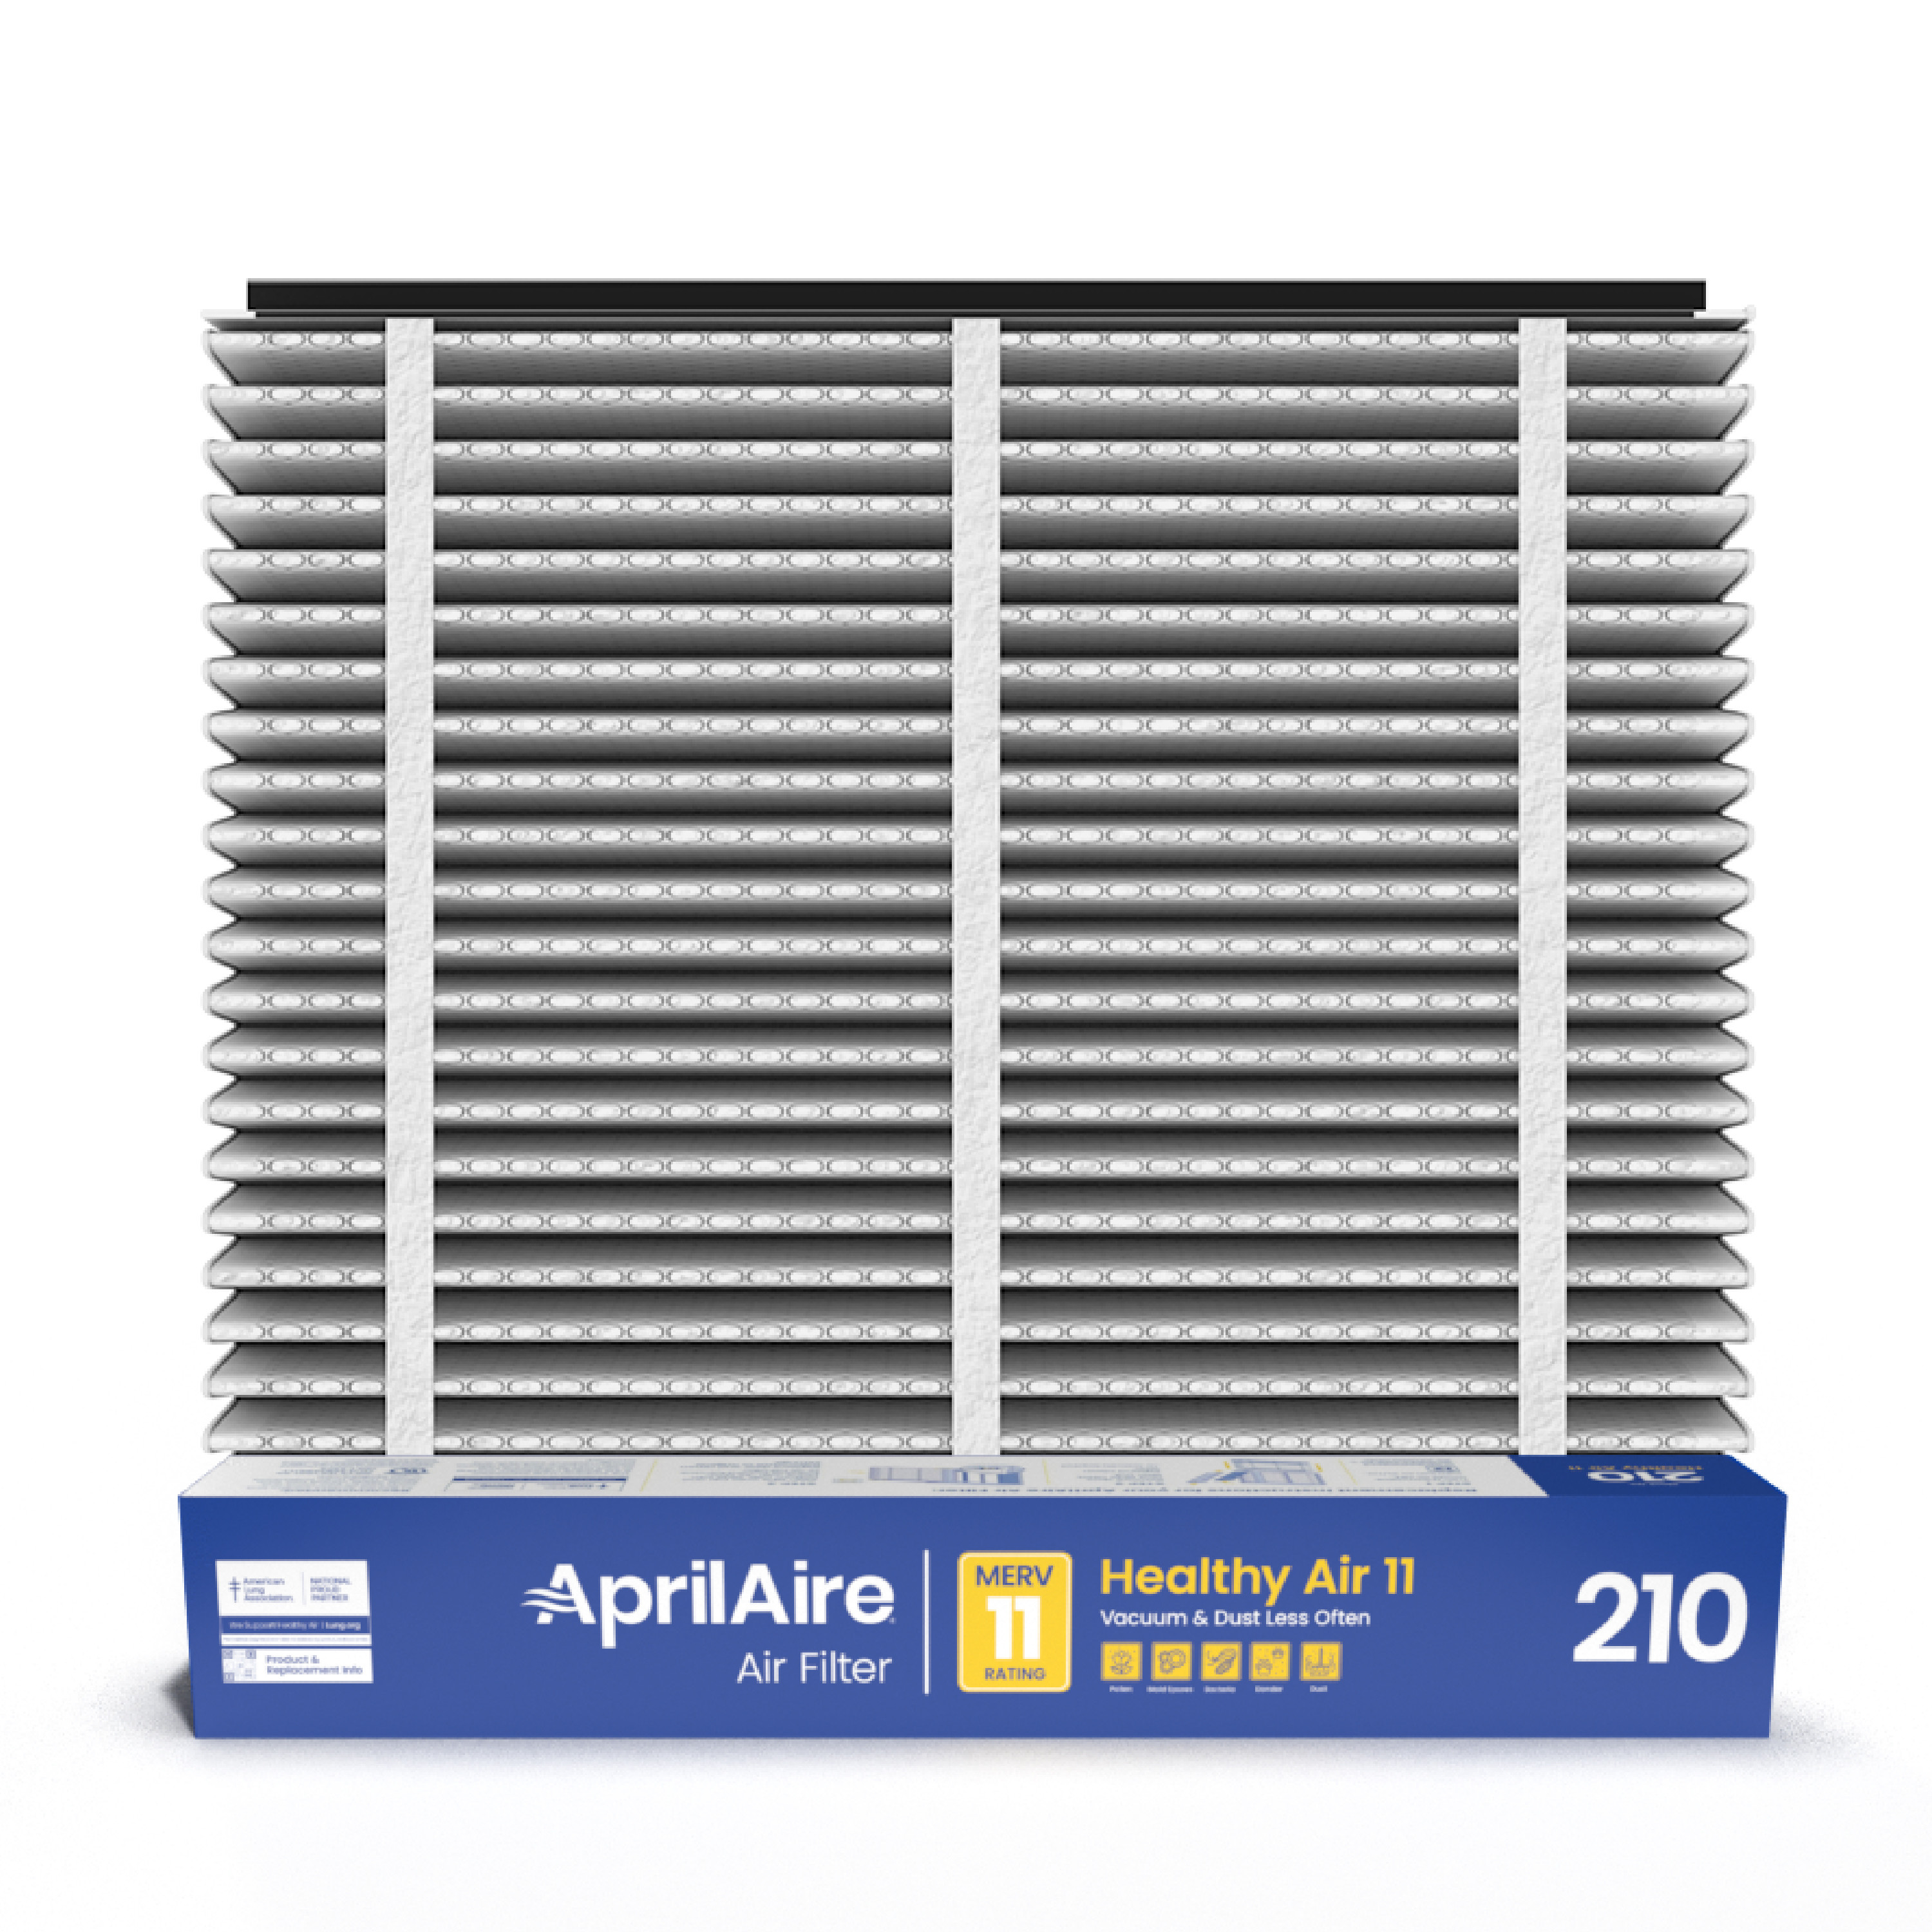 Aprilaire 210 Replacement Air Filter - 8 Pack (Case) - image 1 of 17